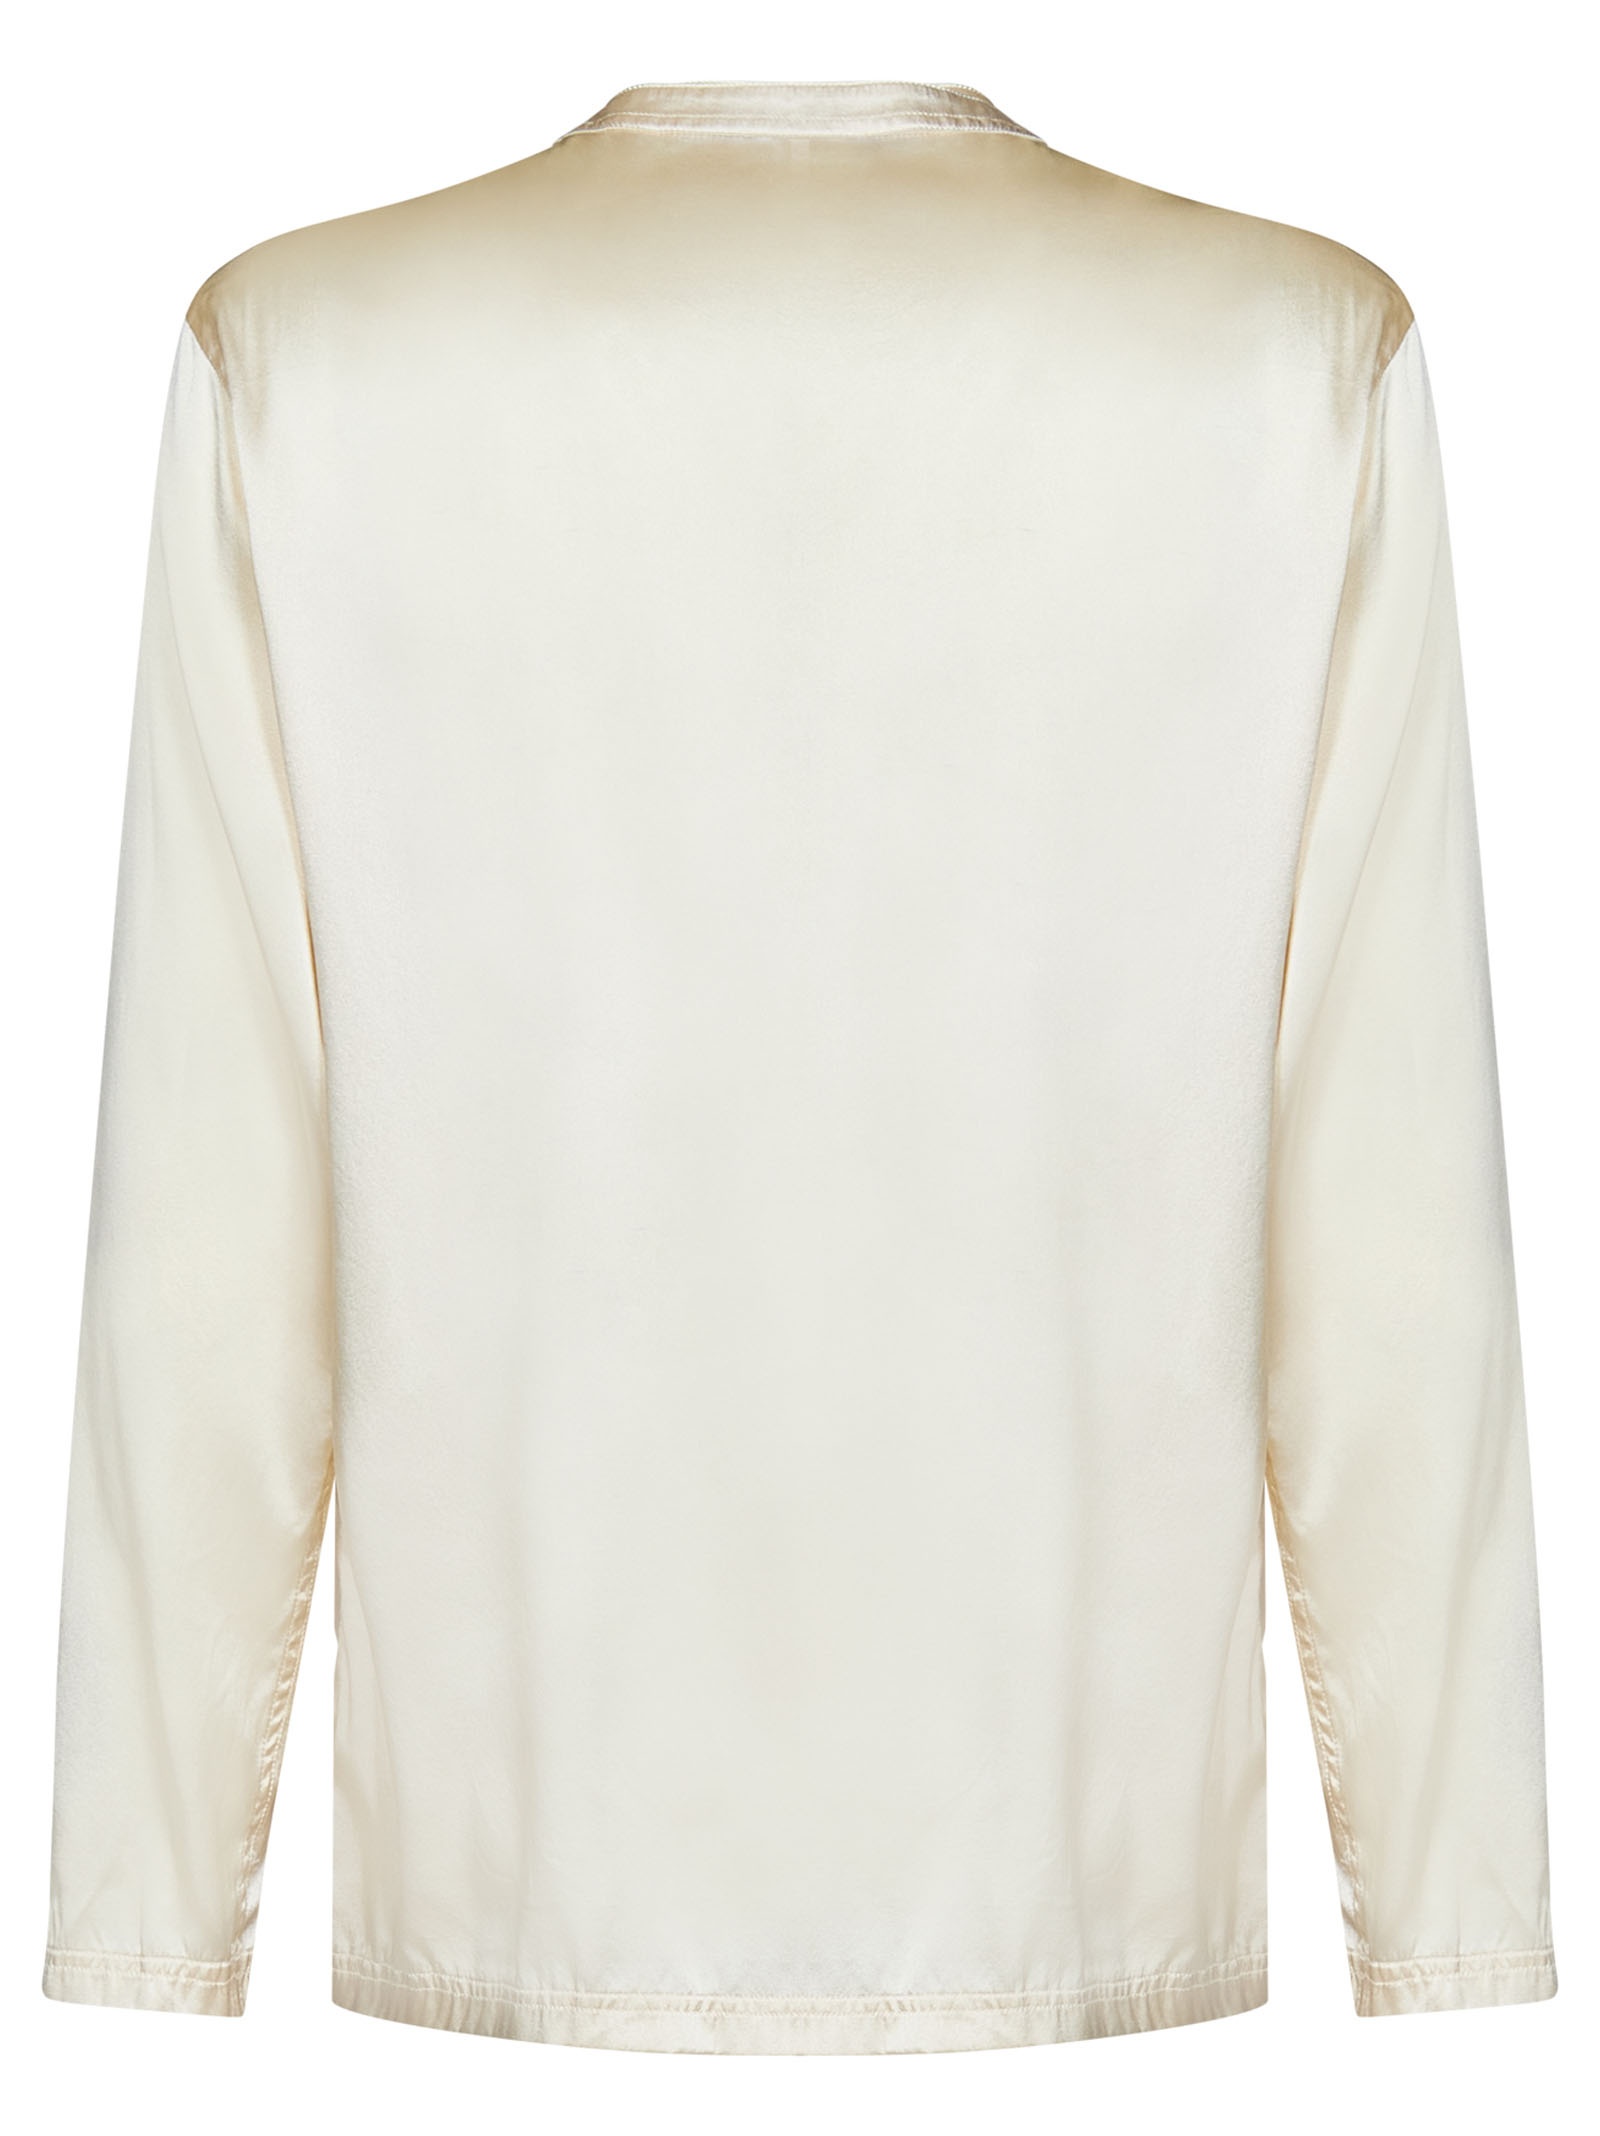 Pearl-colored stretch silk pajama shirt with henley collar and logo label. - 2